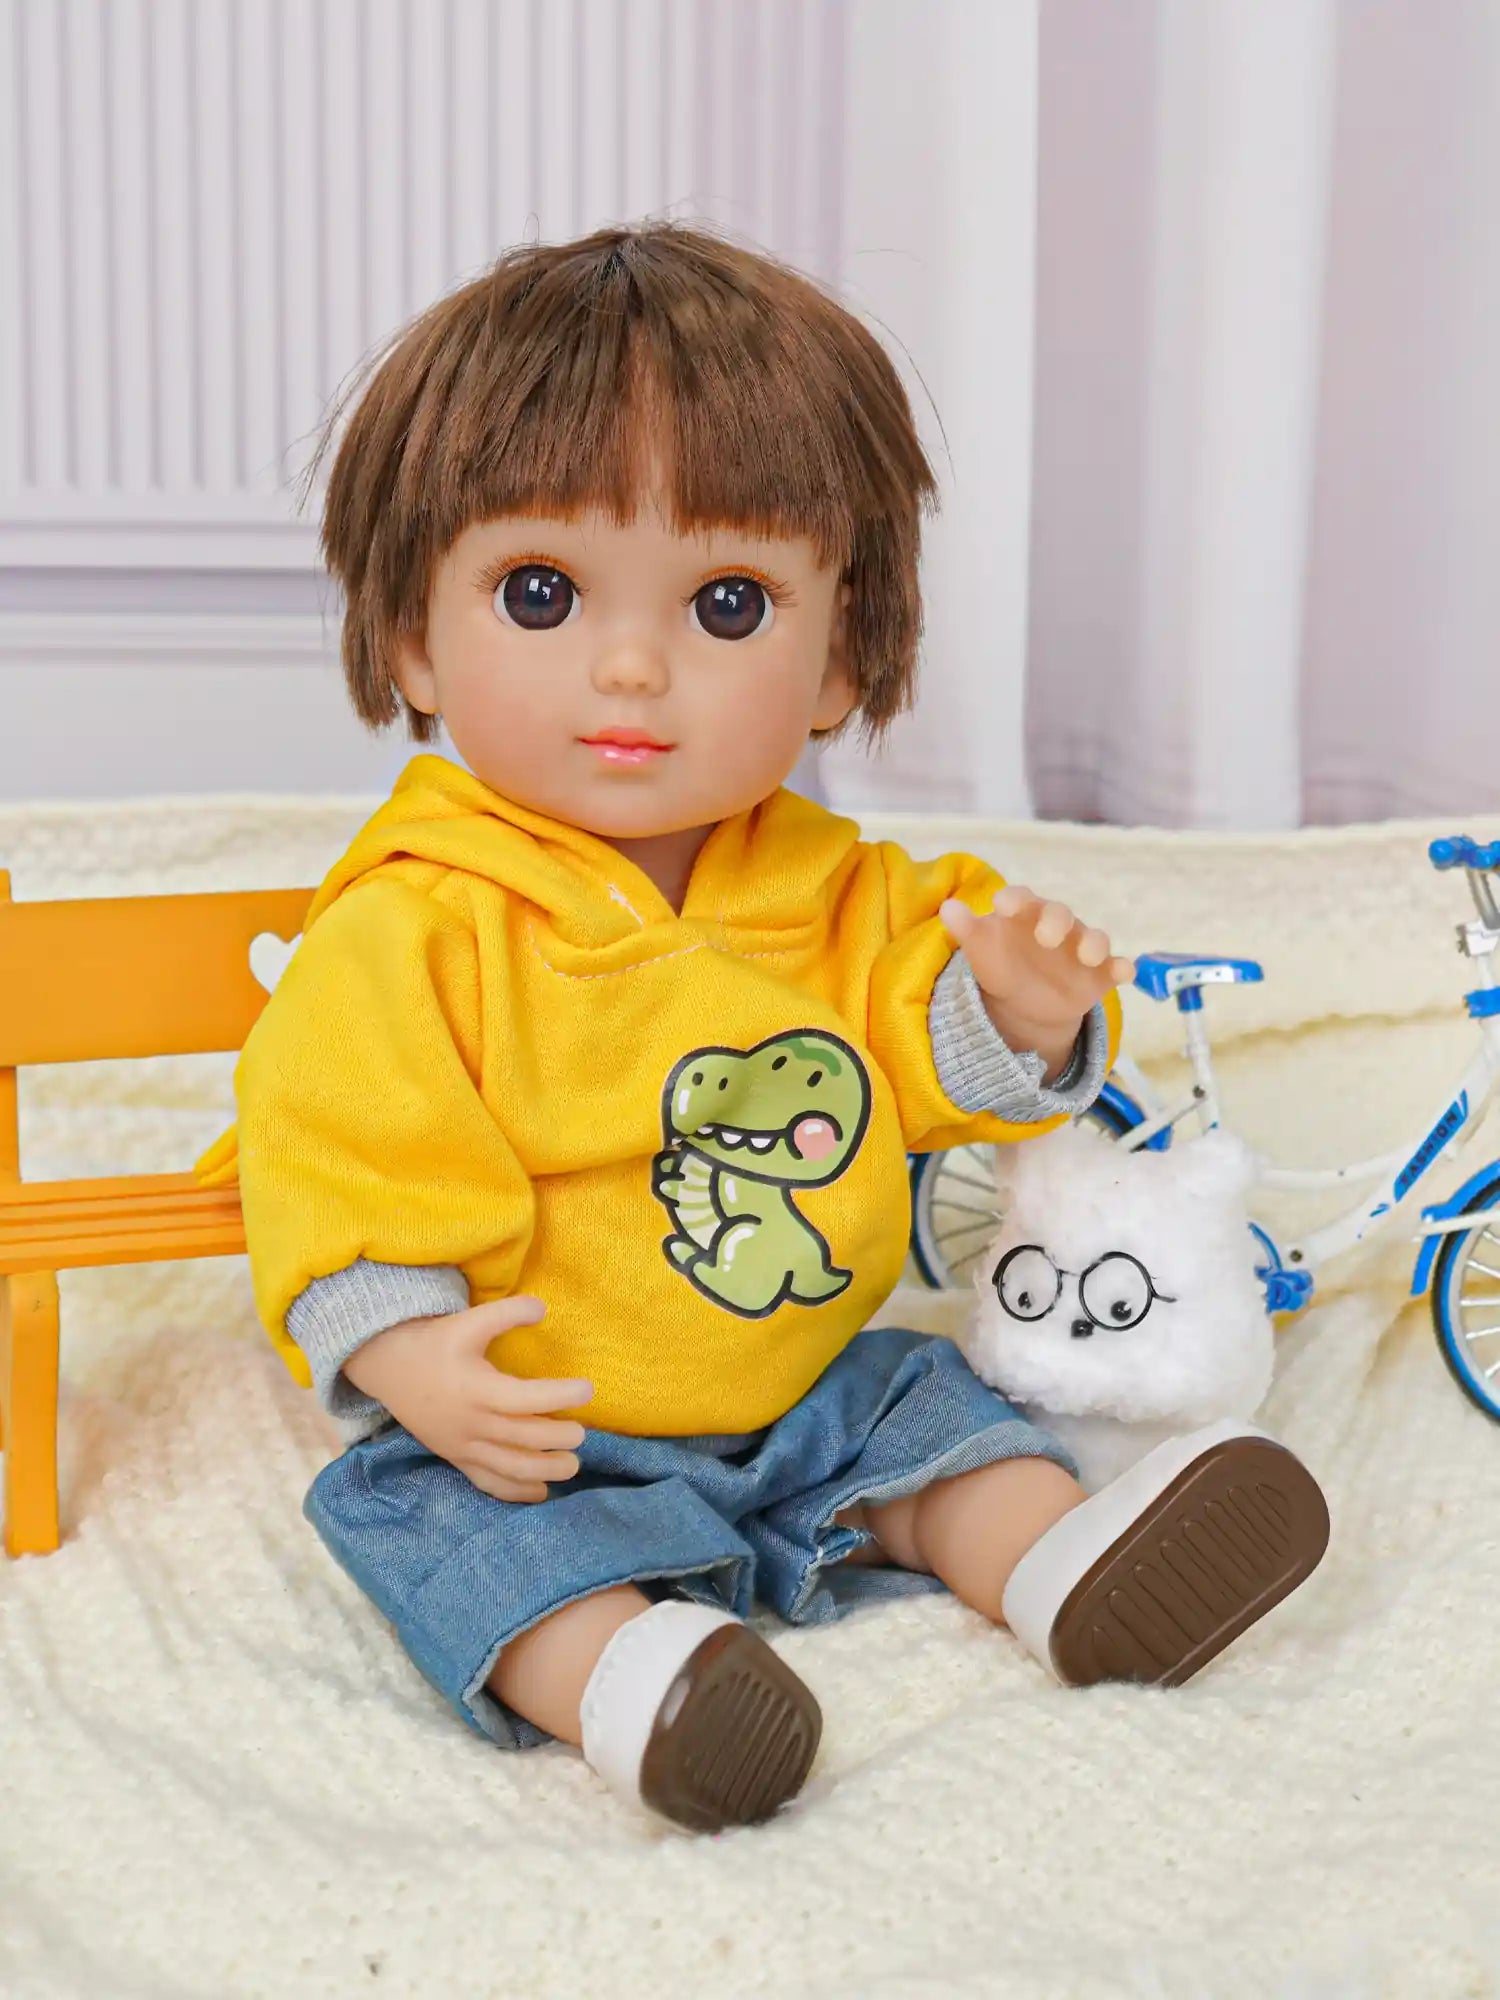 Seated doll with playful eyes, wearing a hoodie and jeans, next to a stuffed dog with glasses.